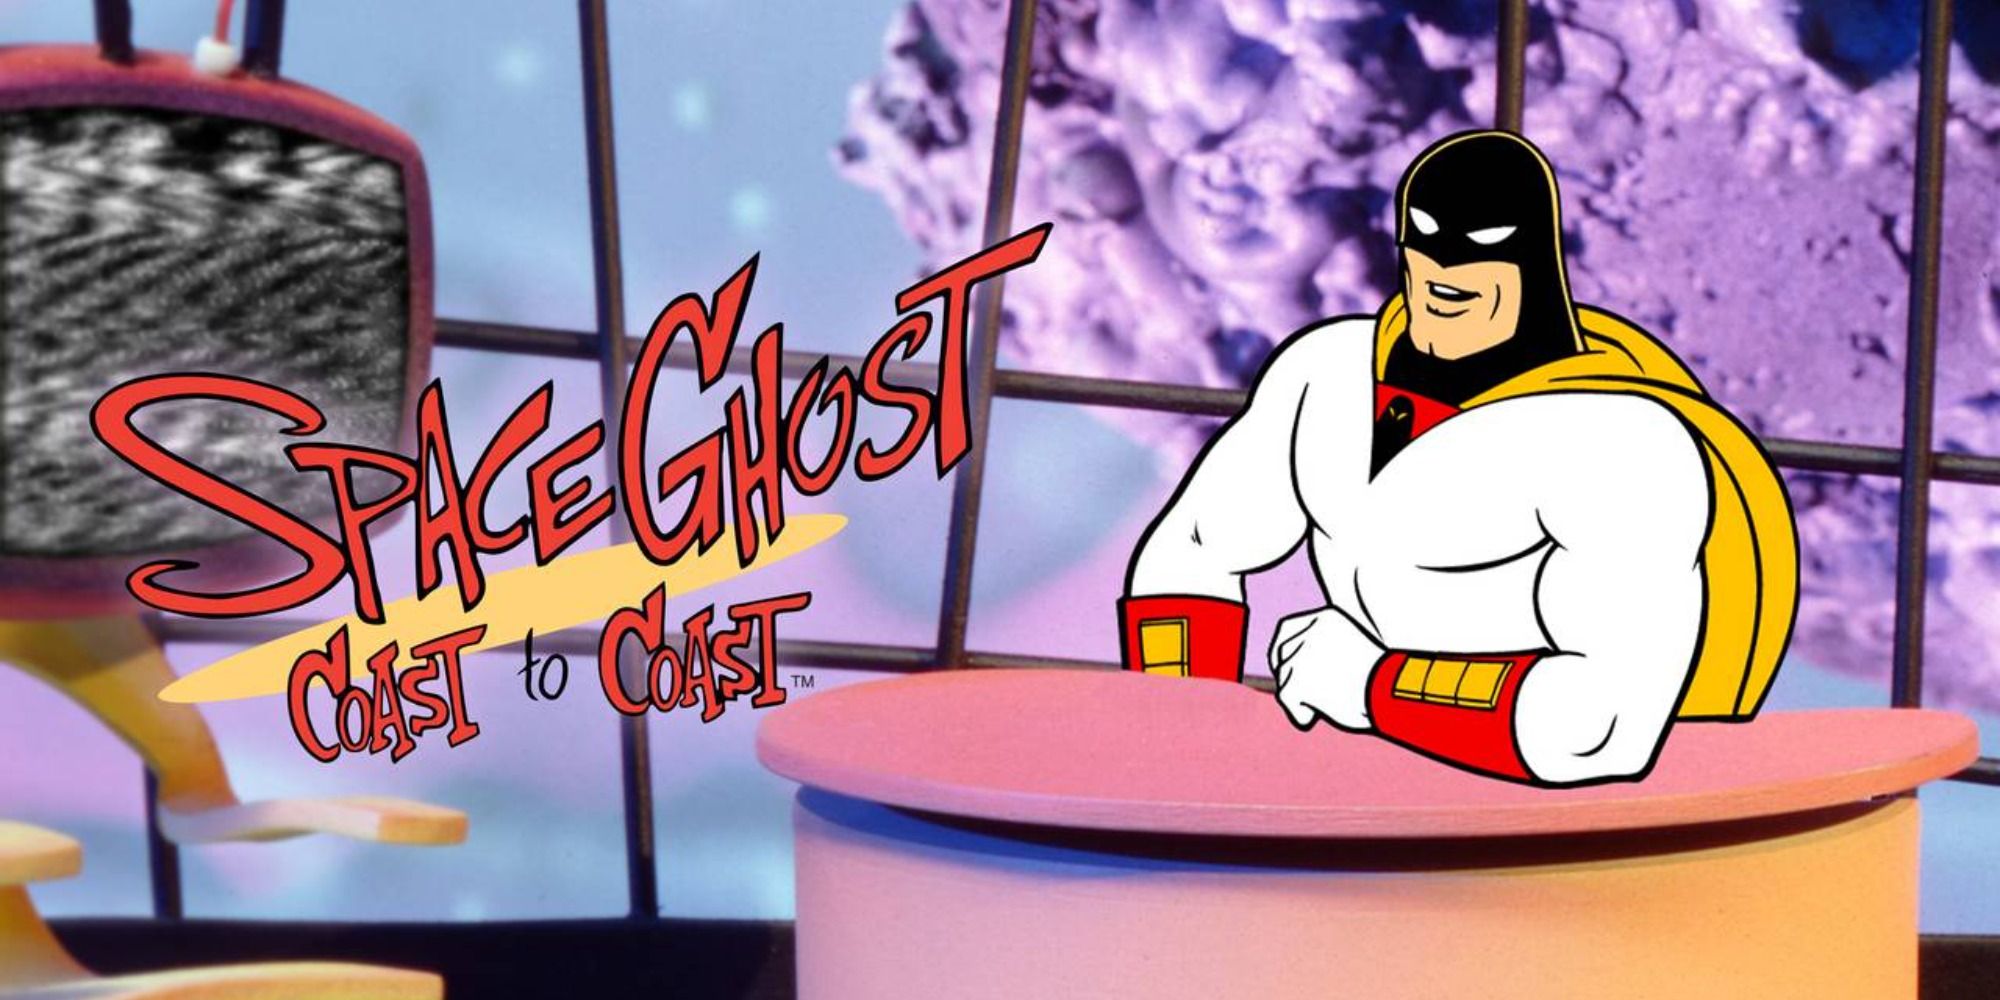 Space Ghost at a late night desk with "Space Ghost Coast to Coast" in text next to him